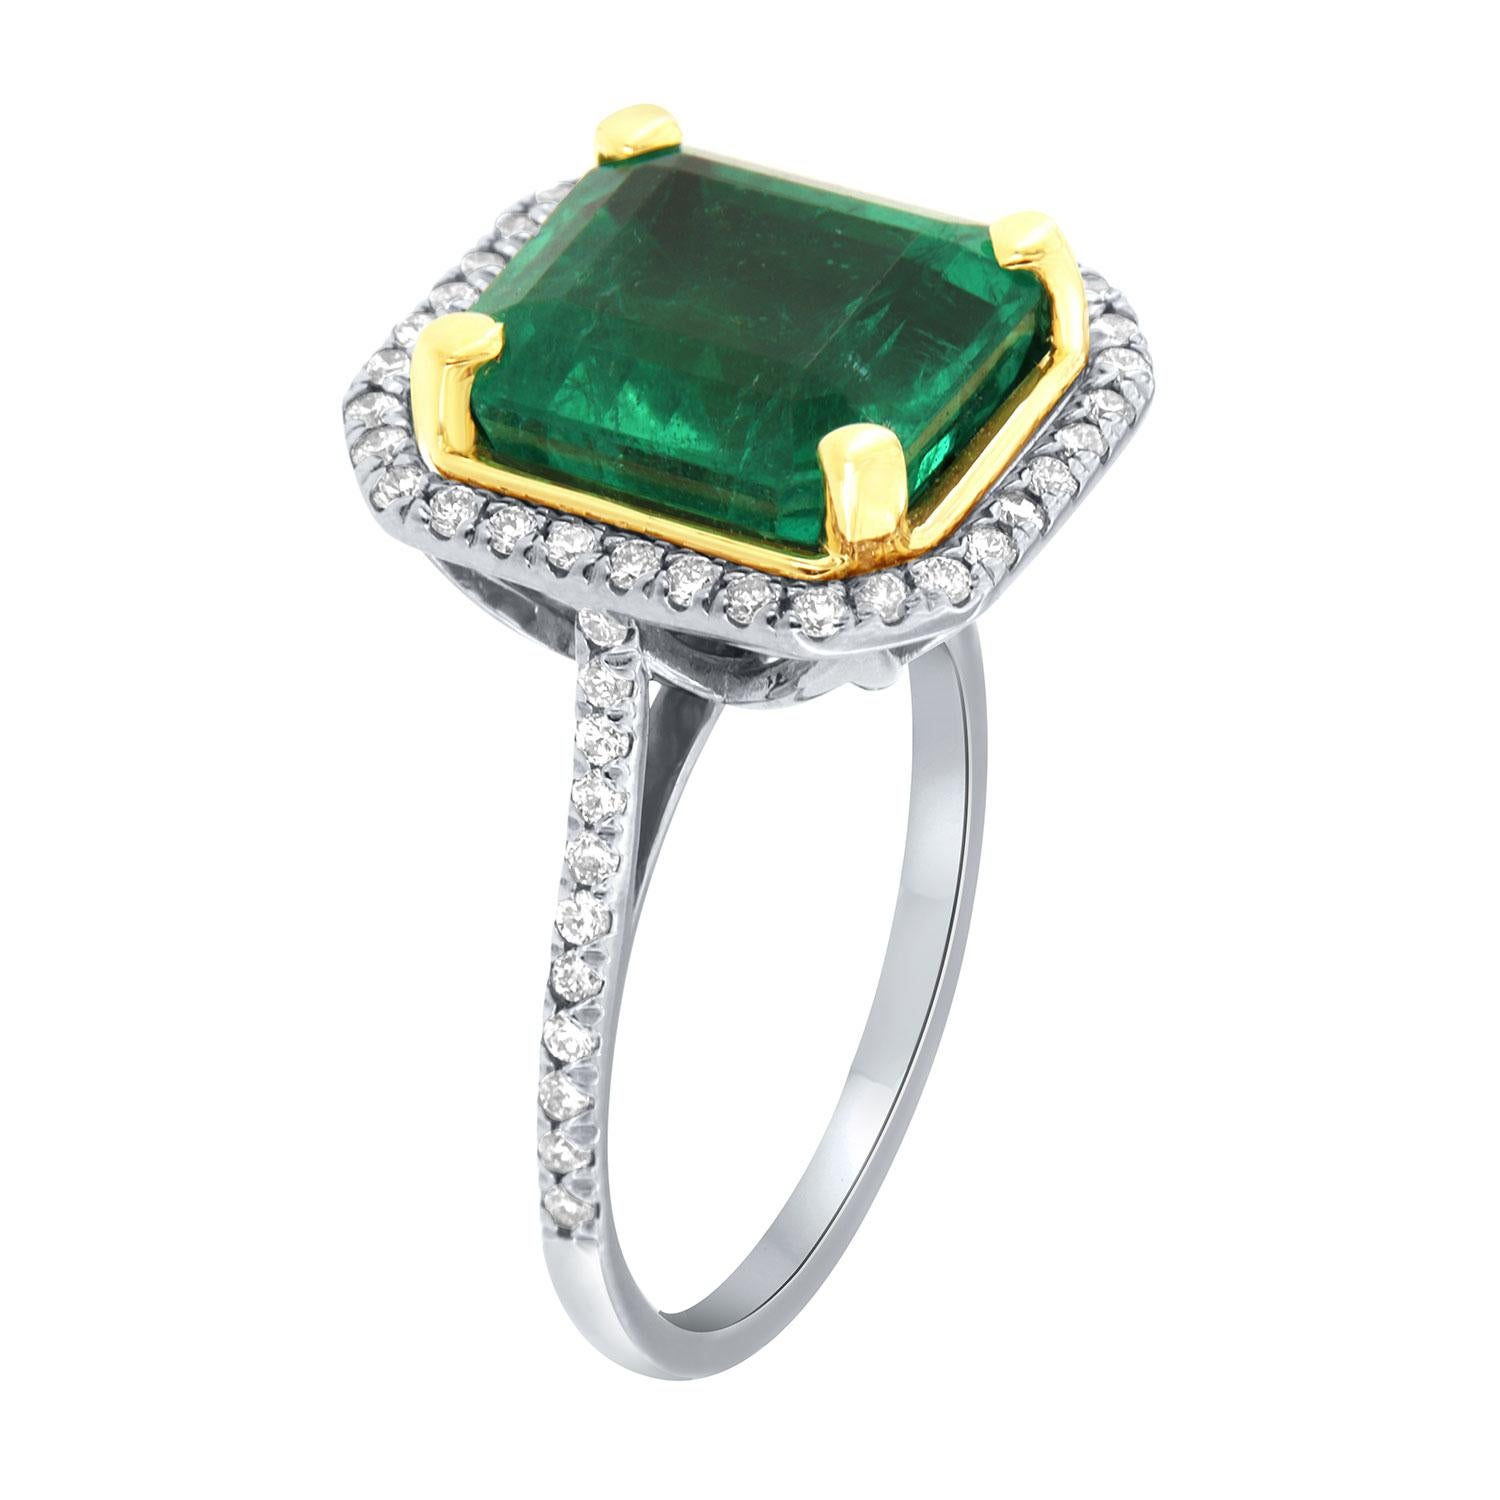 This 18K White and Yellow gold ring features a 6.09 - Carat Ascher cut Natural Green emerald from Ethiopia. Excellent bright and vibrant green color. The emerald is encircled by a halo of brilliant round diamonds on a 1.5 mm band. The diamonds are